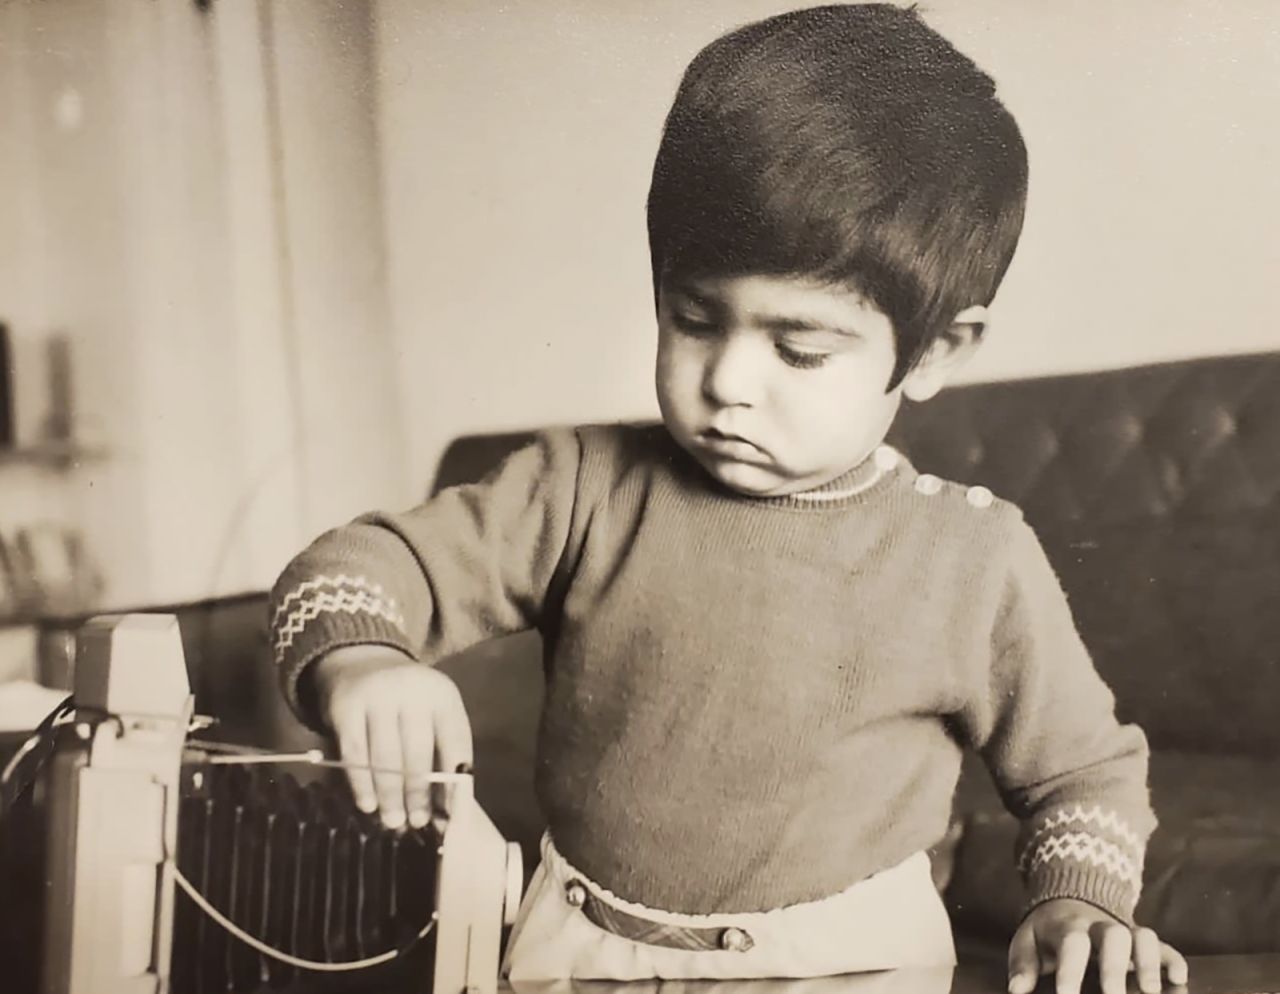 Zak Khogyani playing with a camera as a boy in Afghanistan. He came to the US with his parents when he was 9.